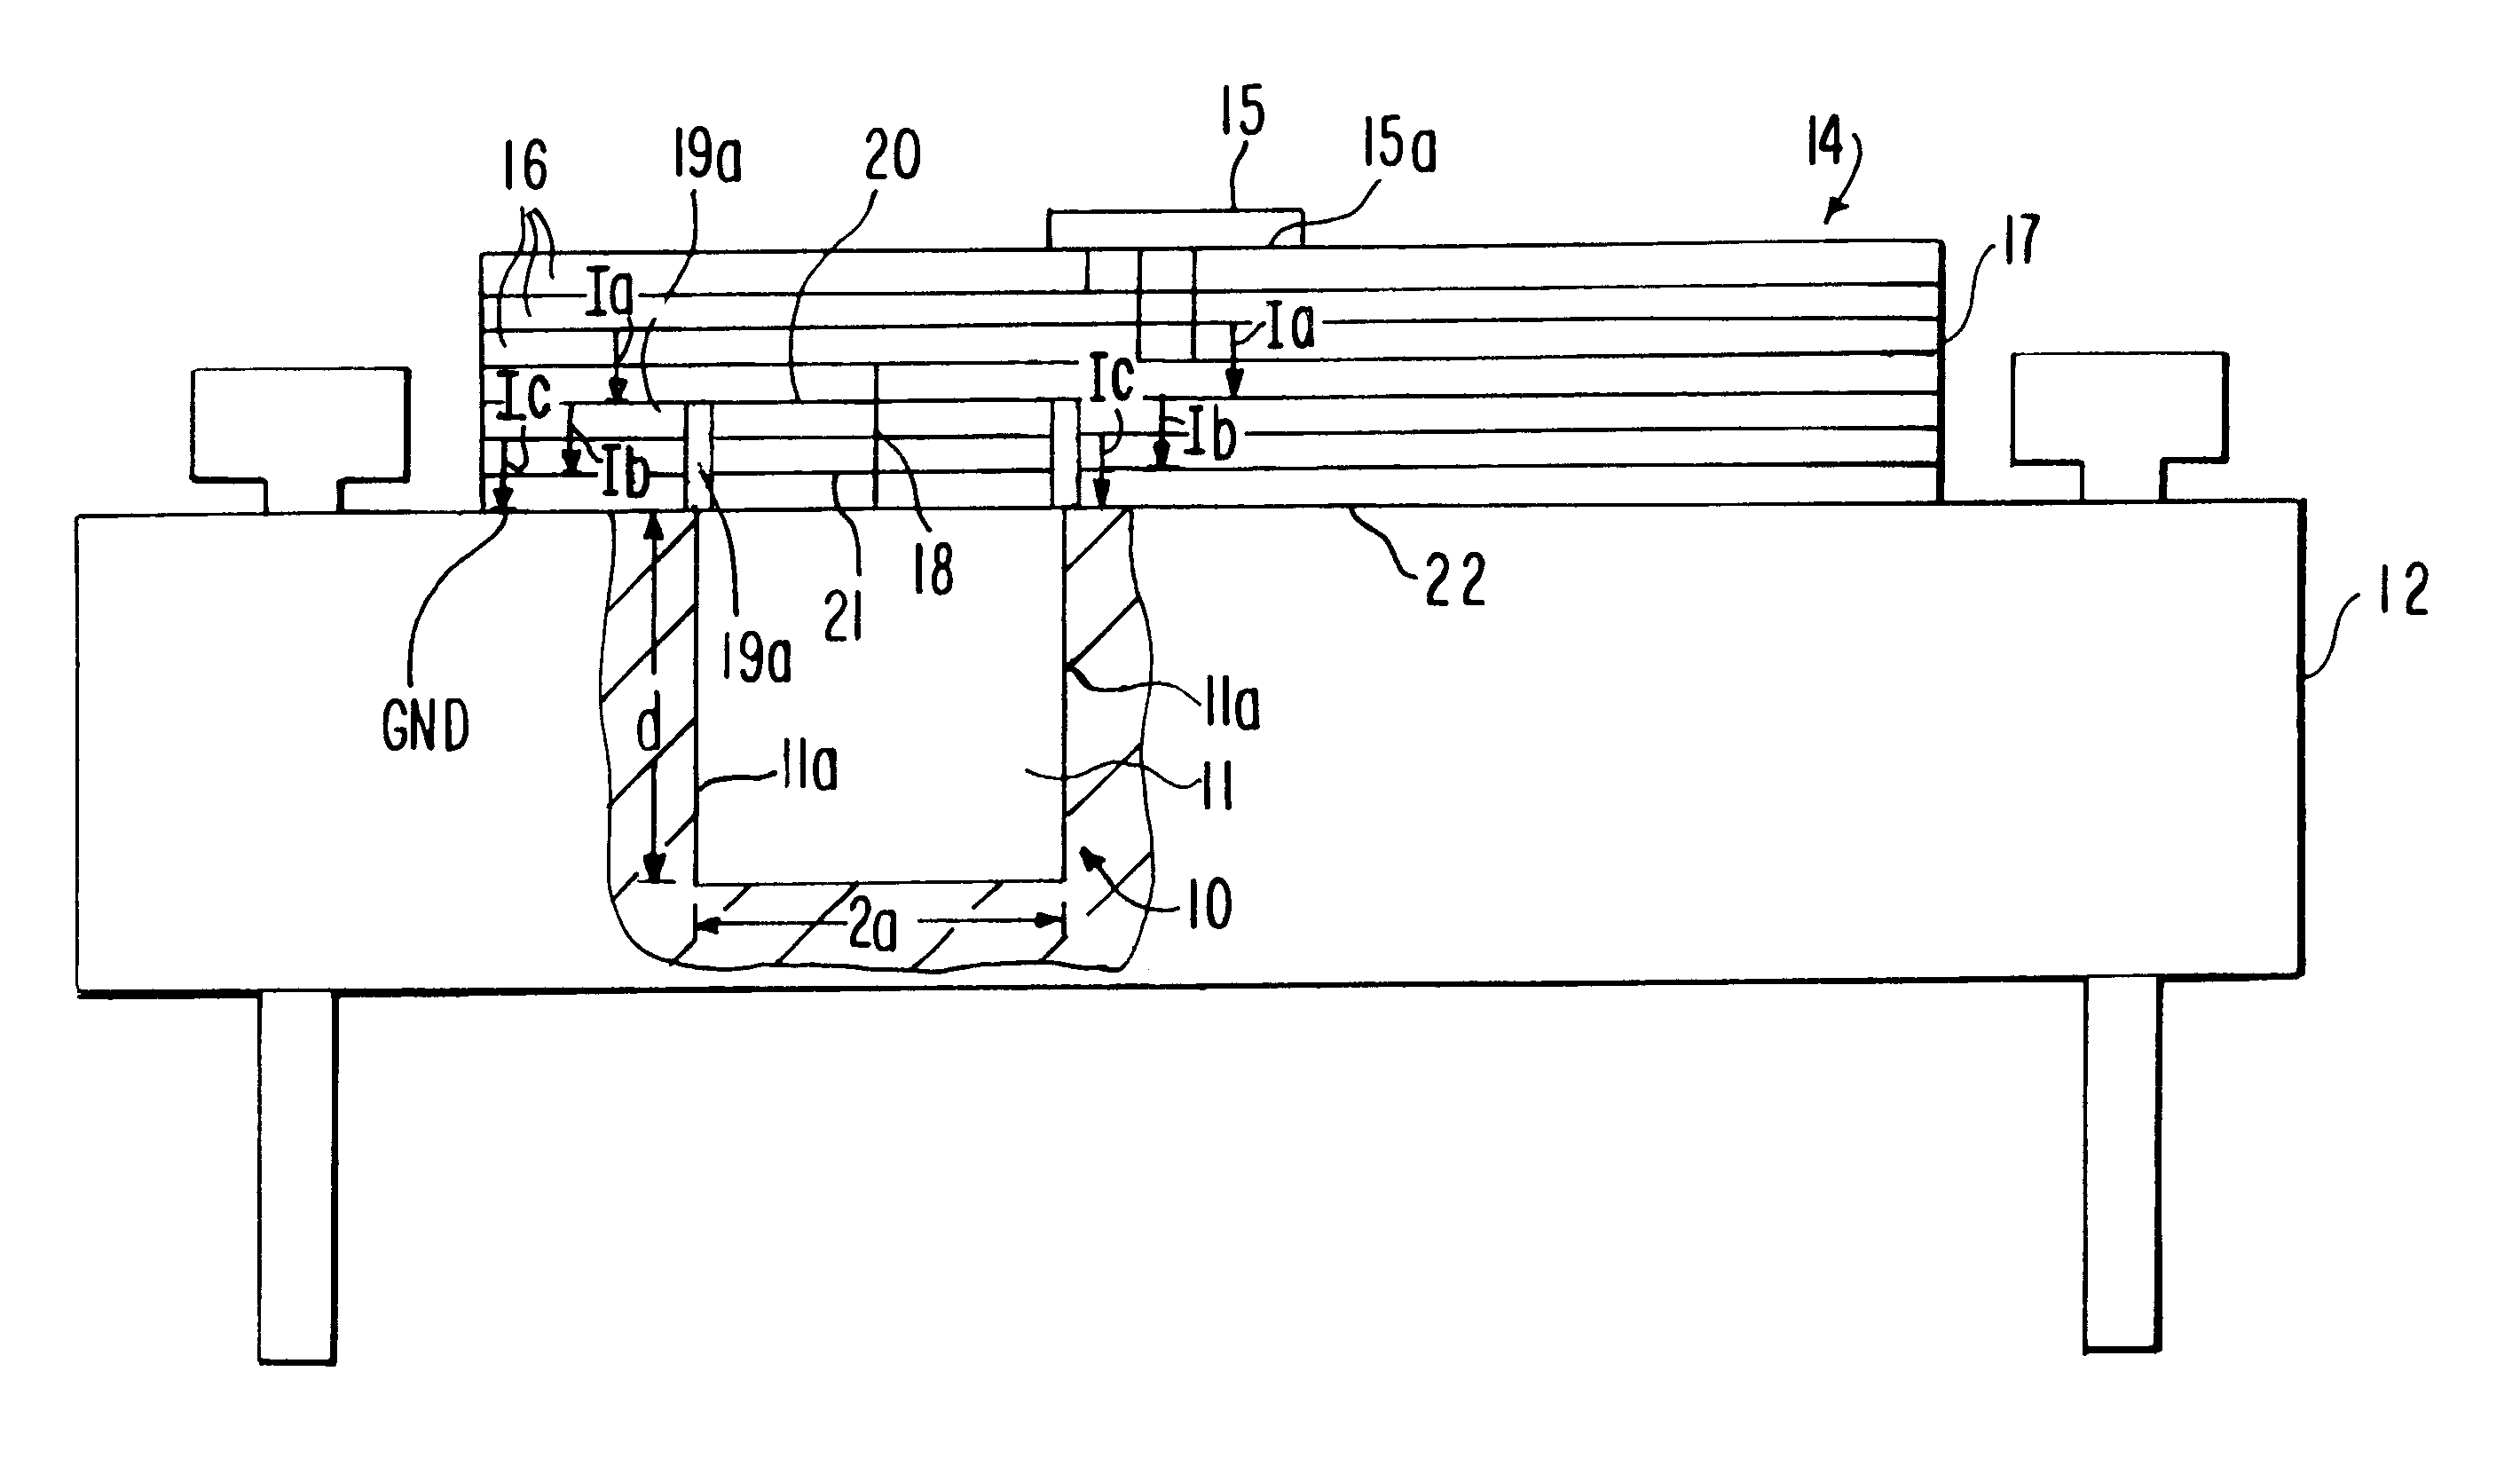 Resonator structure embedded in mechanical structure